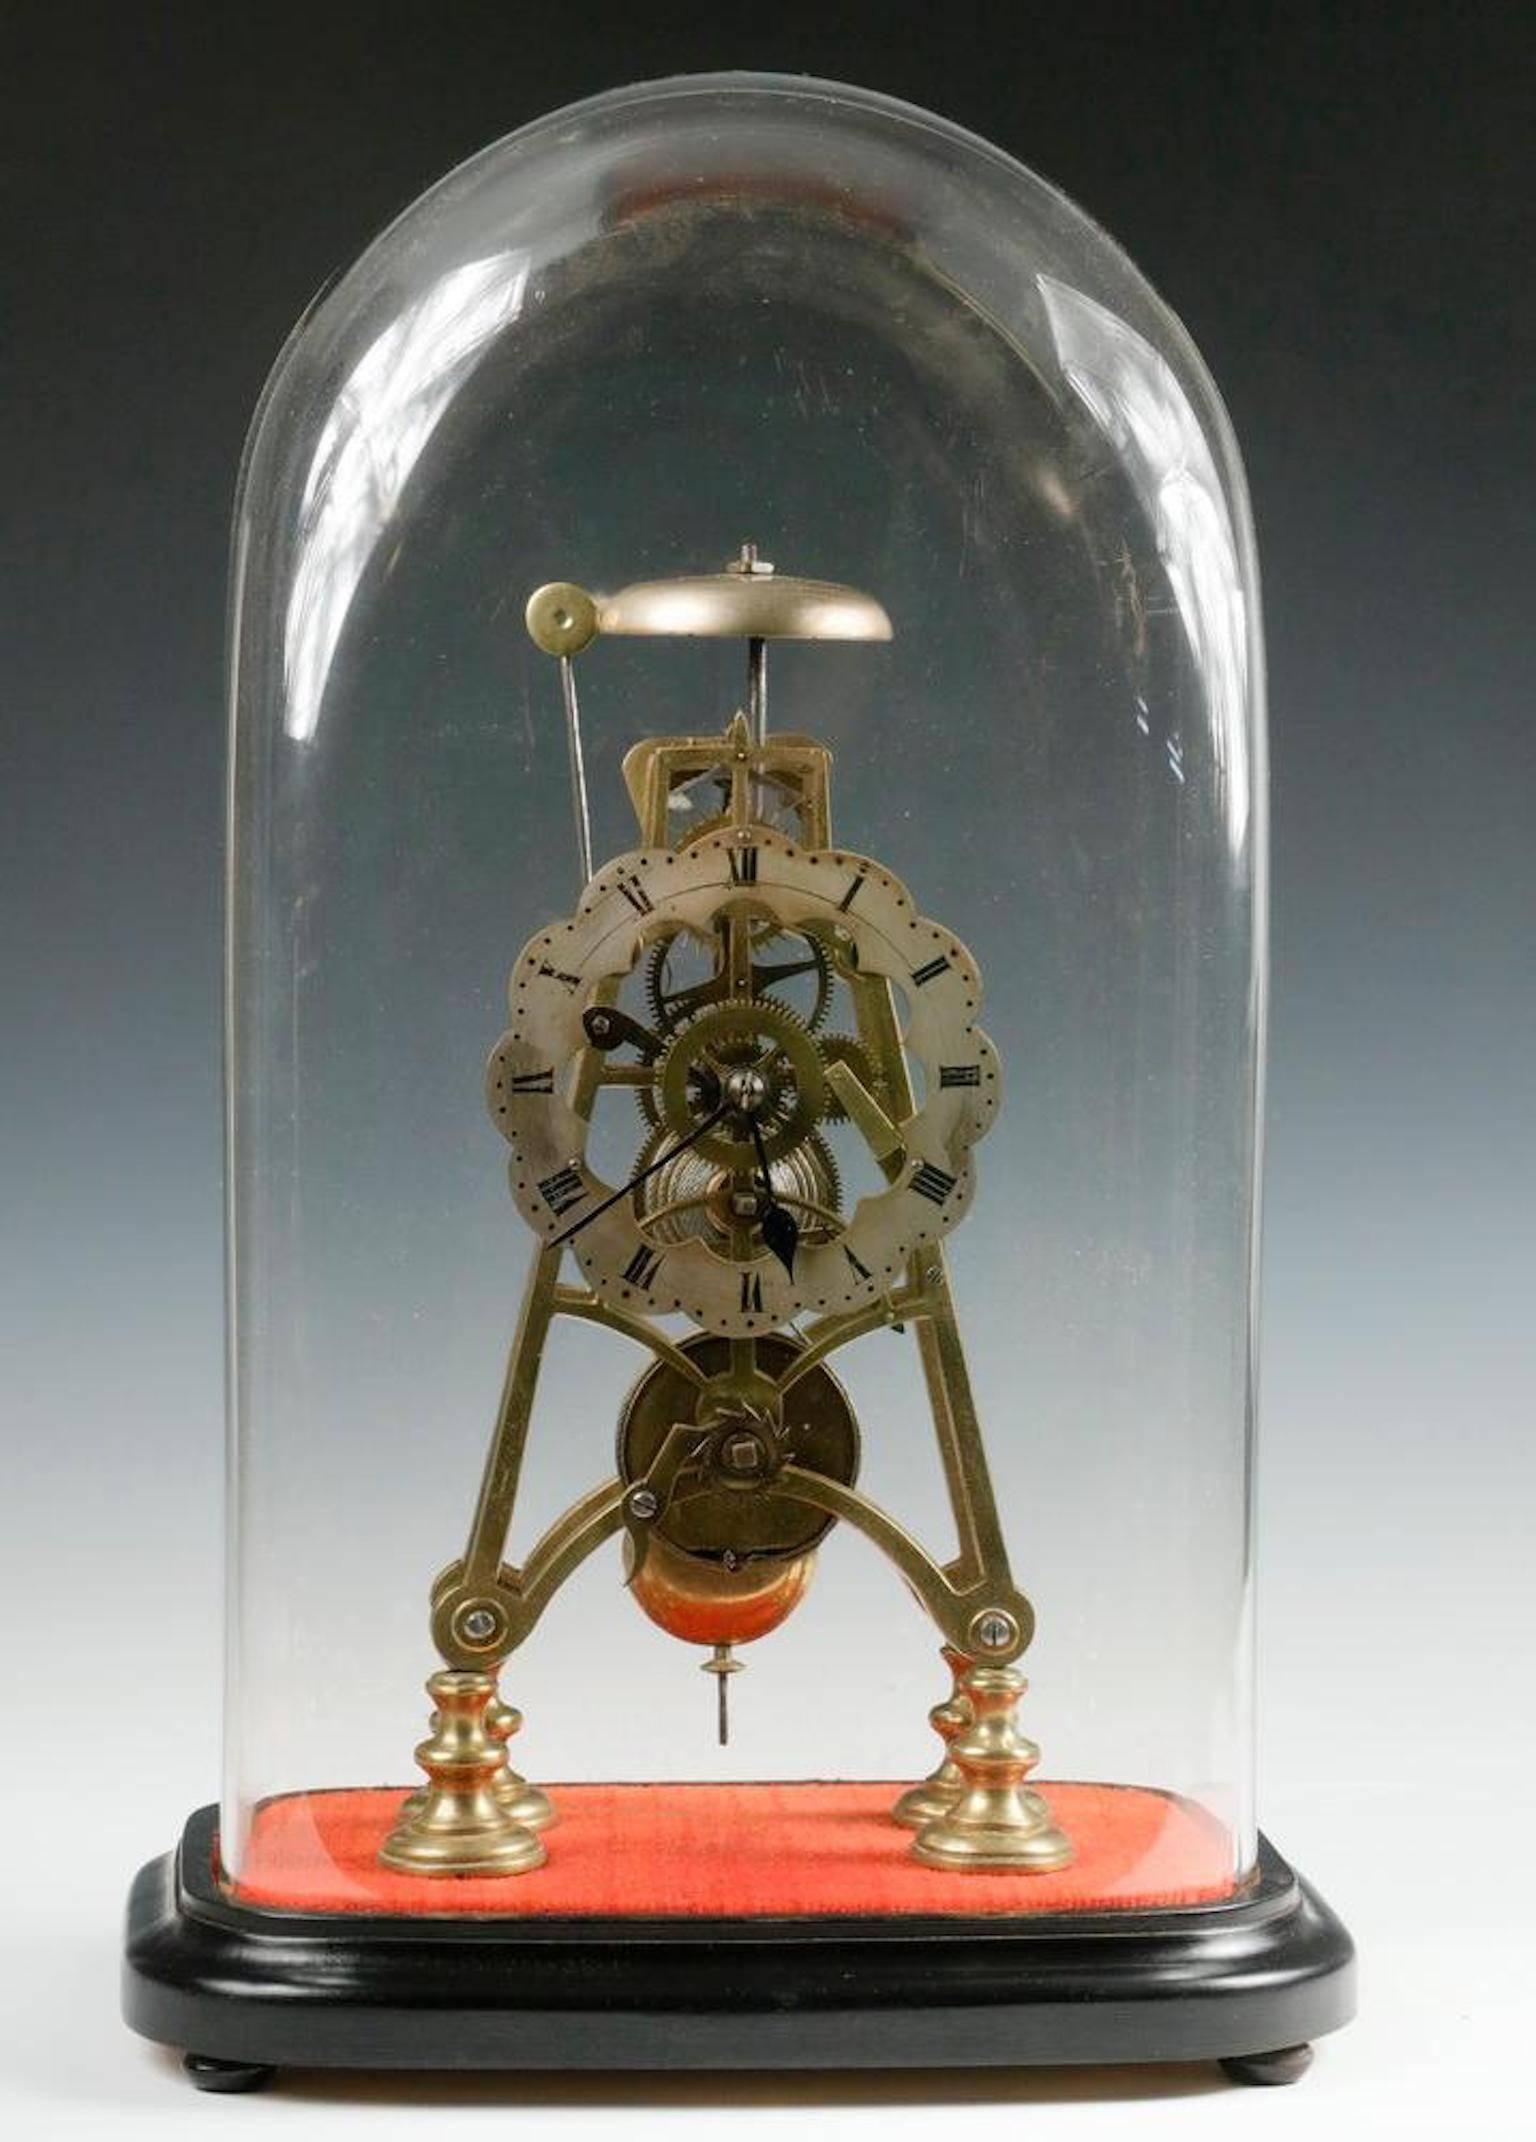 Early Skeleton clock under glass dome, with single train fusee movement, silvered dial, with striking alarm, key and pendulum, brass works and frame, set on ebonized molded wood base.
Clock dimensions: 12 1/2in. high, dome: 19in. high, 11in. x 7